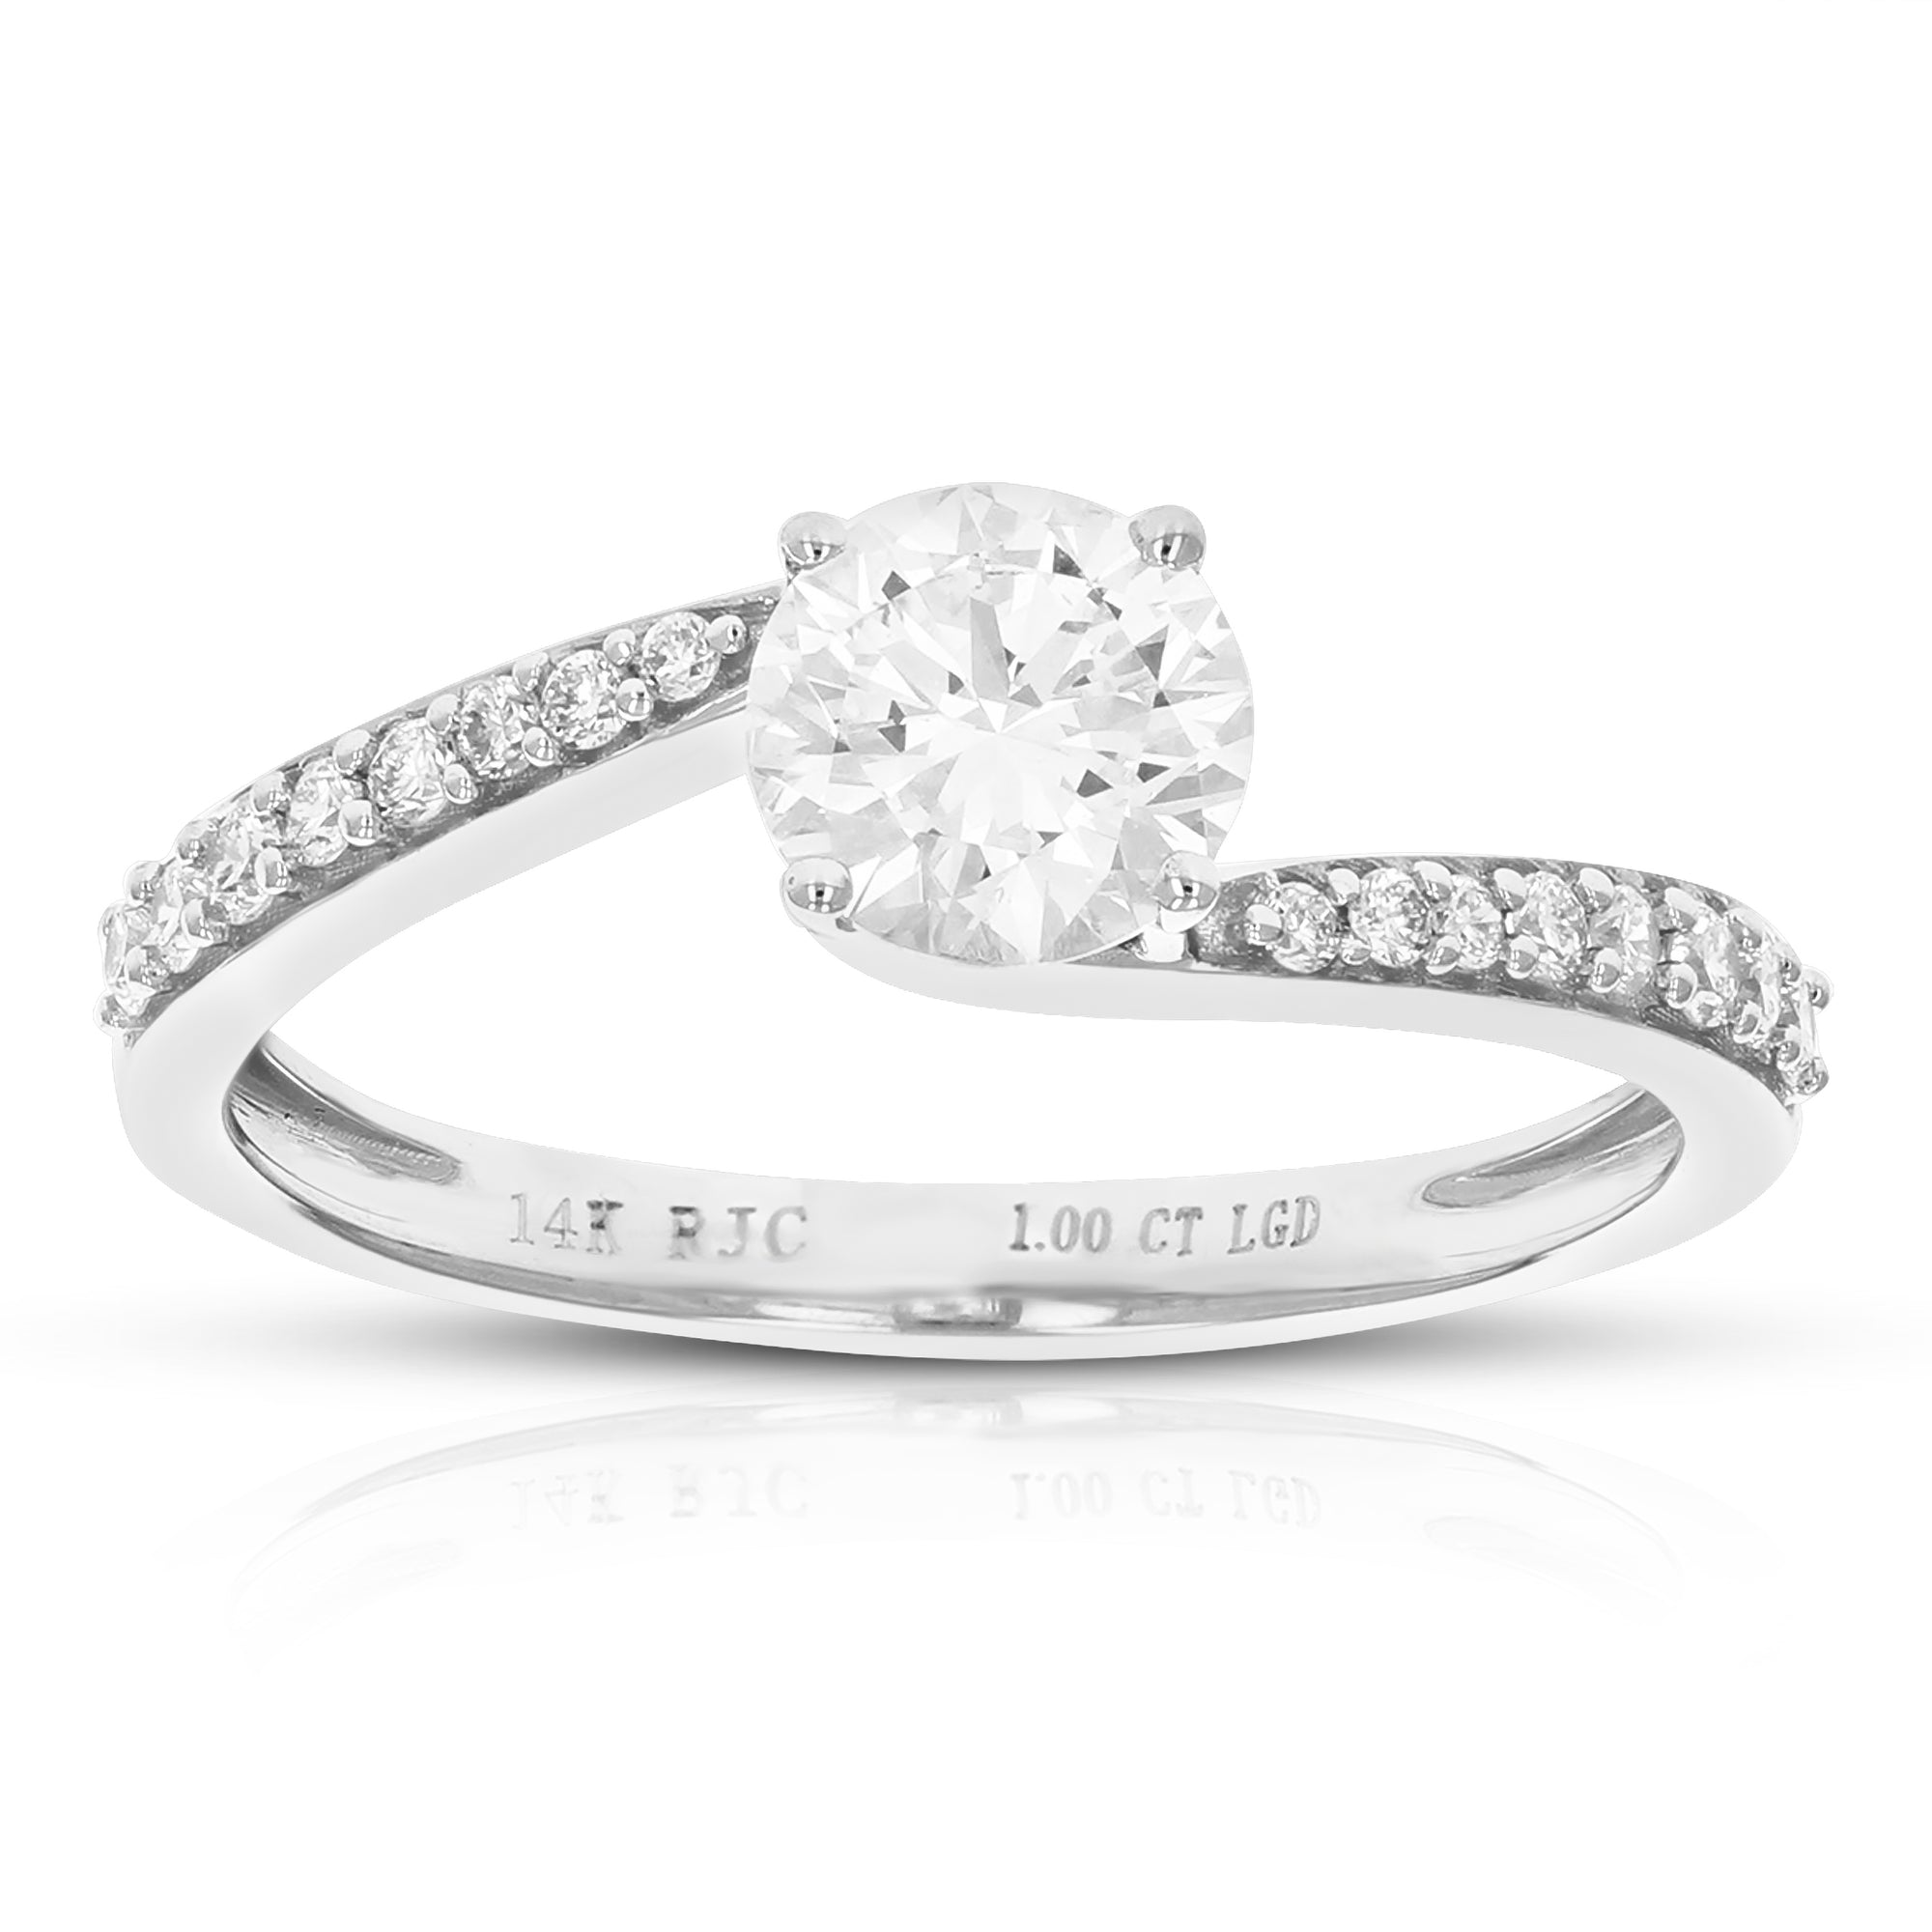 1 cttw Round Lab Grown Diamond Engagement Ring 17 Stones 14K White Gold Prong Set 3/4 Inch